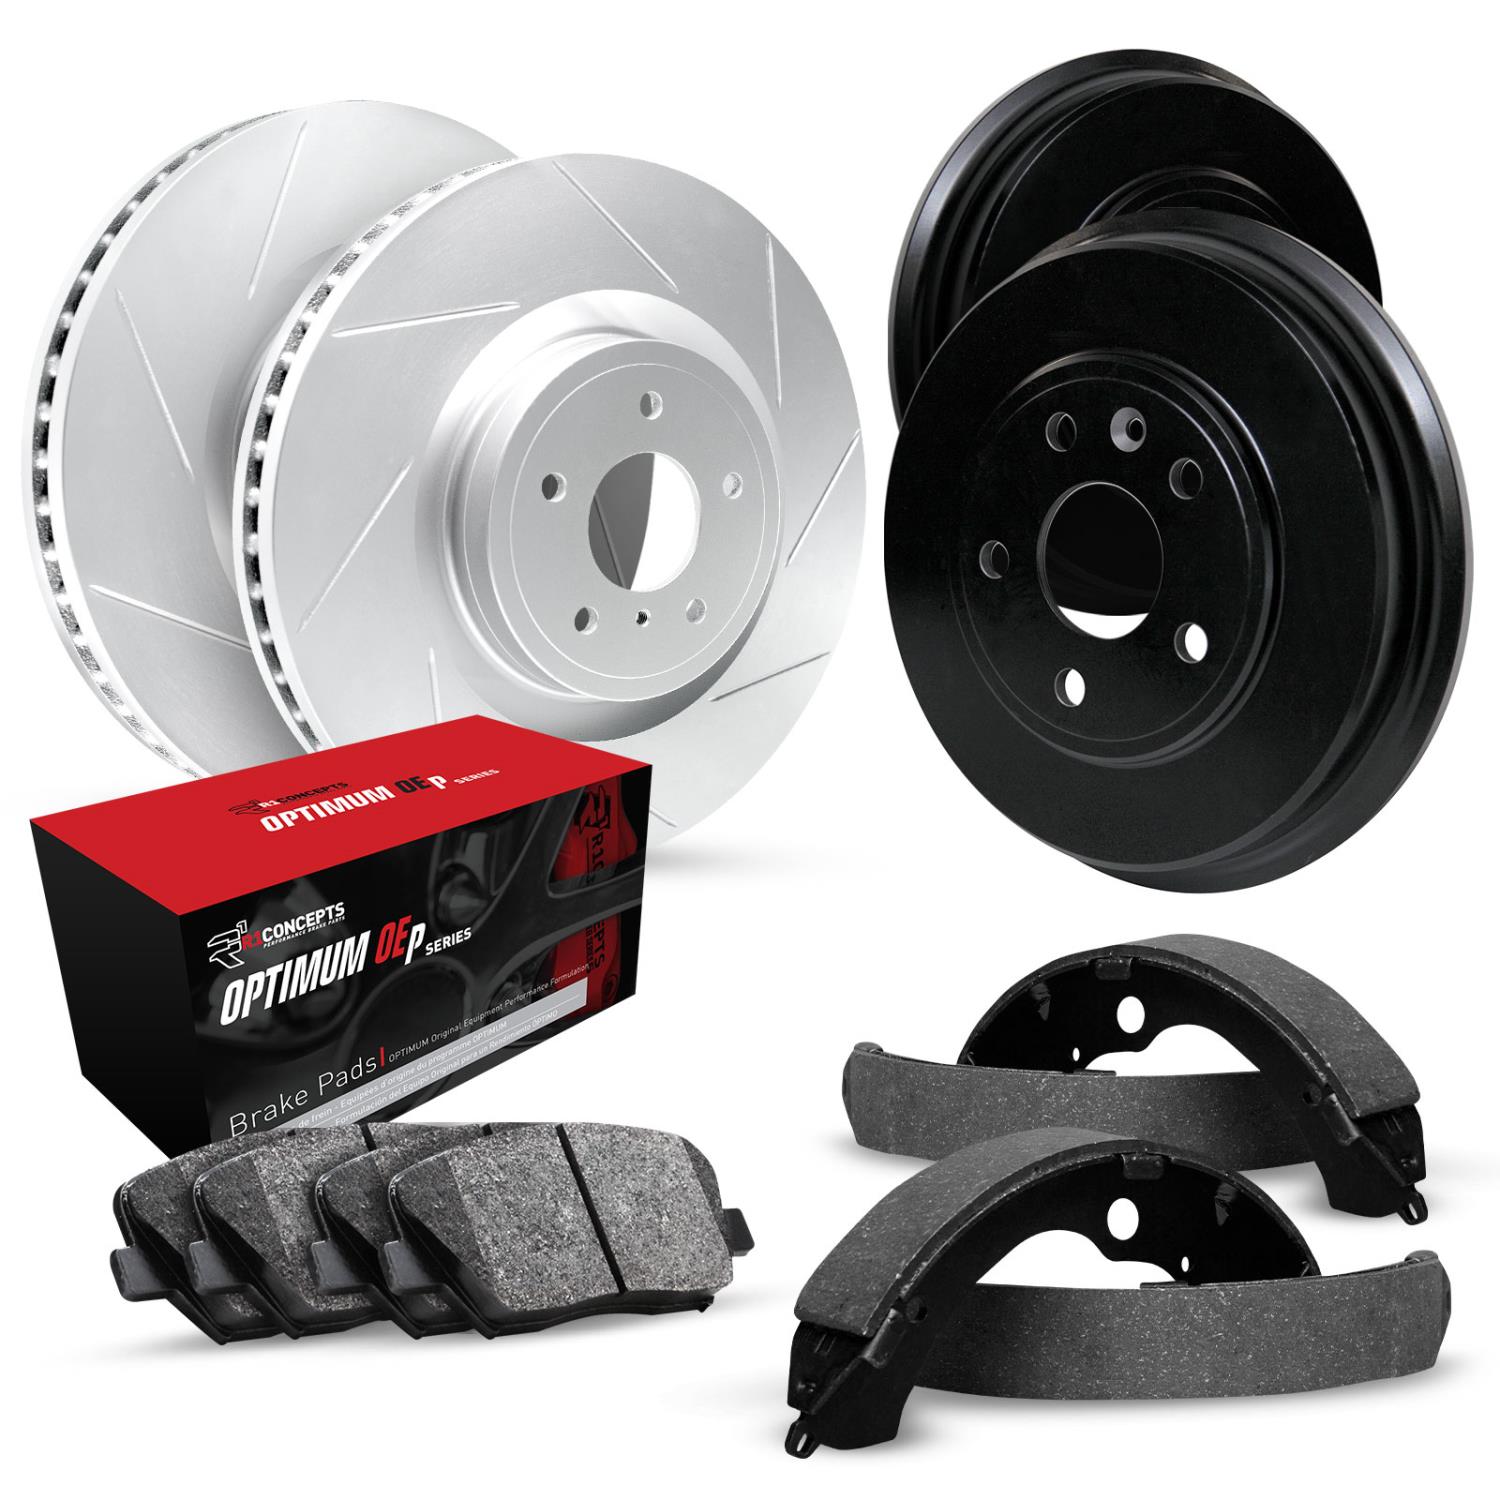 GEO-Carbon Slotted Brake Rotor & Drum Set w/Optimum OE Pads & Shoes, 1993-1993 GM, Position: Front & Rear